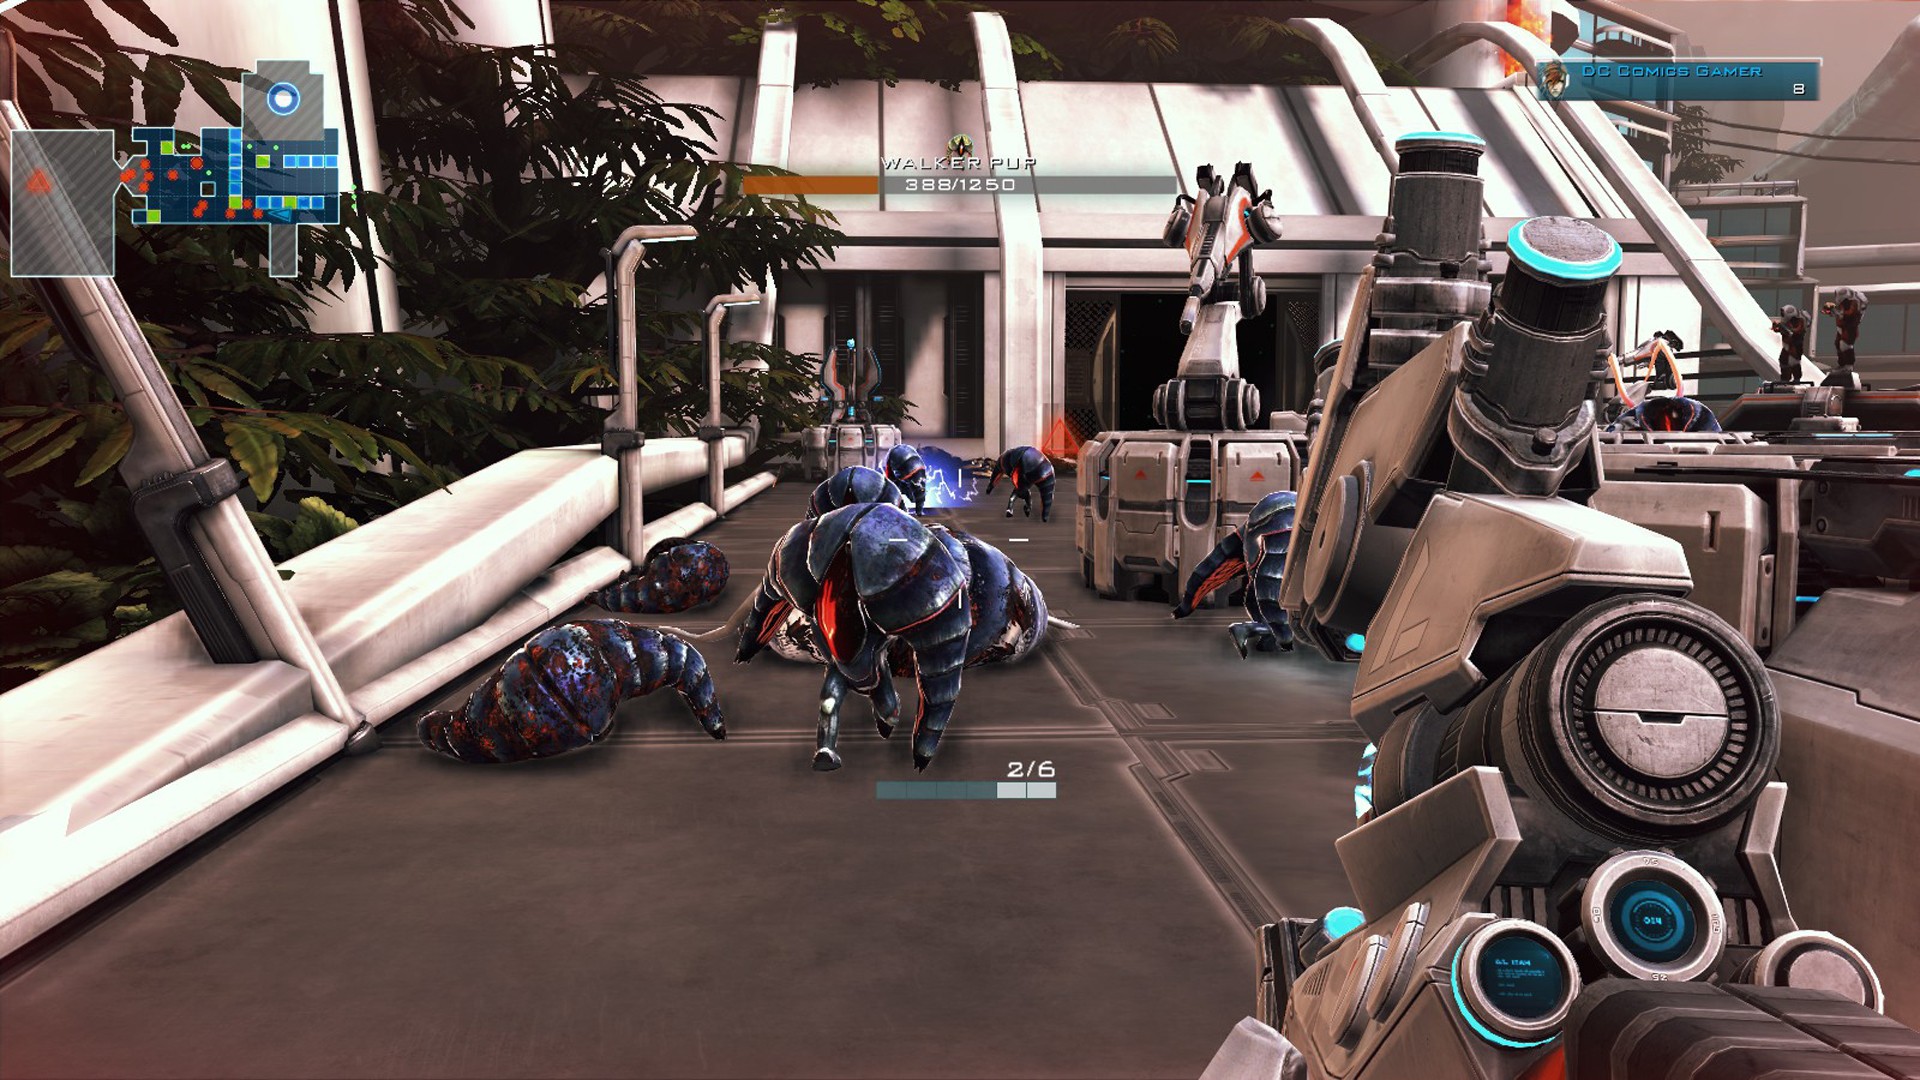 Best tower defense games: a swarm of small insectoid bipeds walking past gun turrets in Sanctum 2.